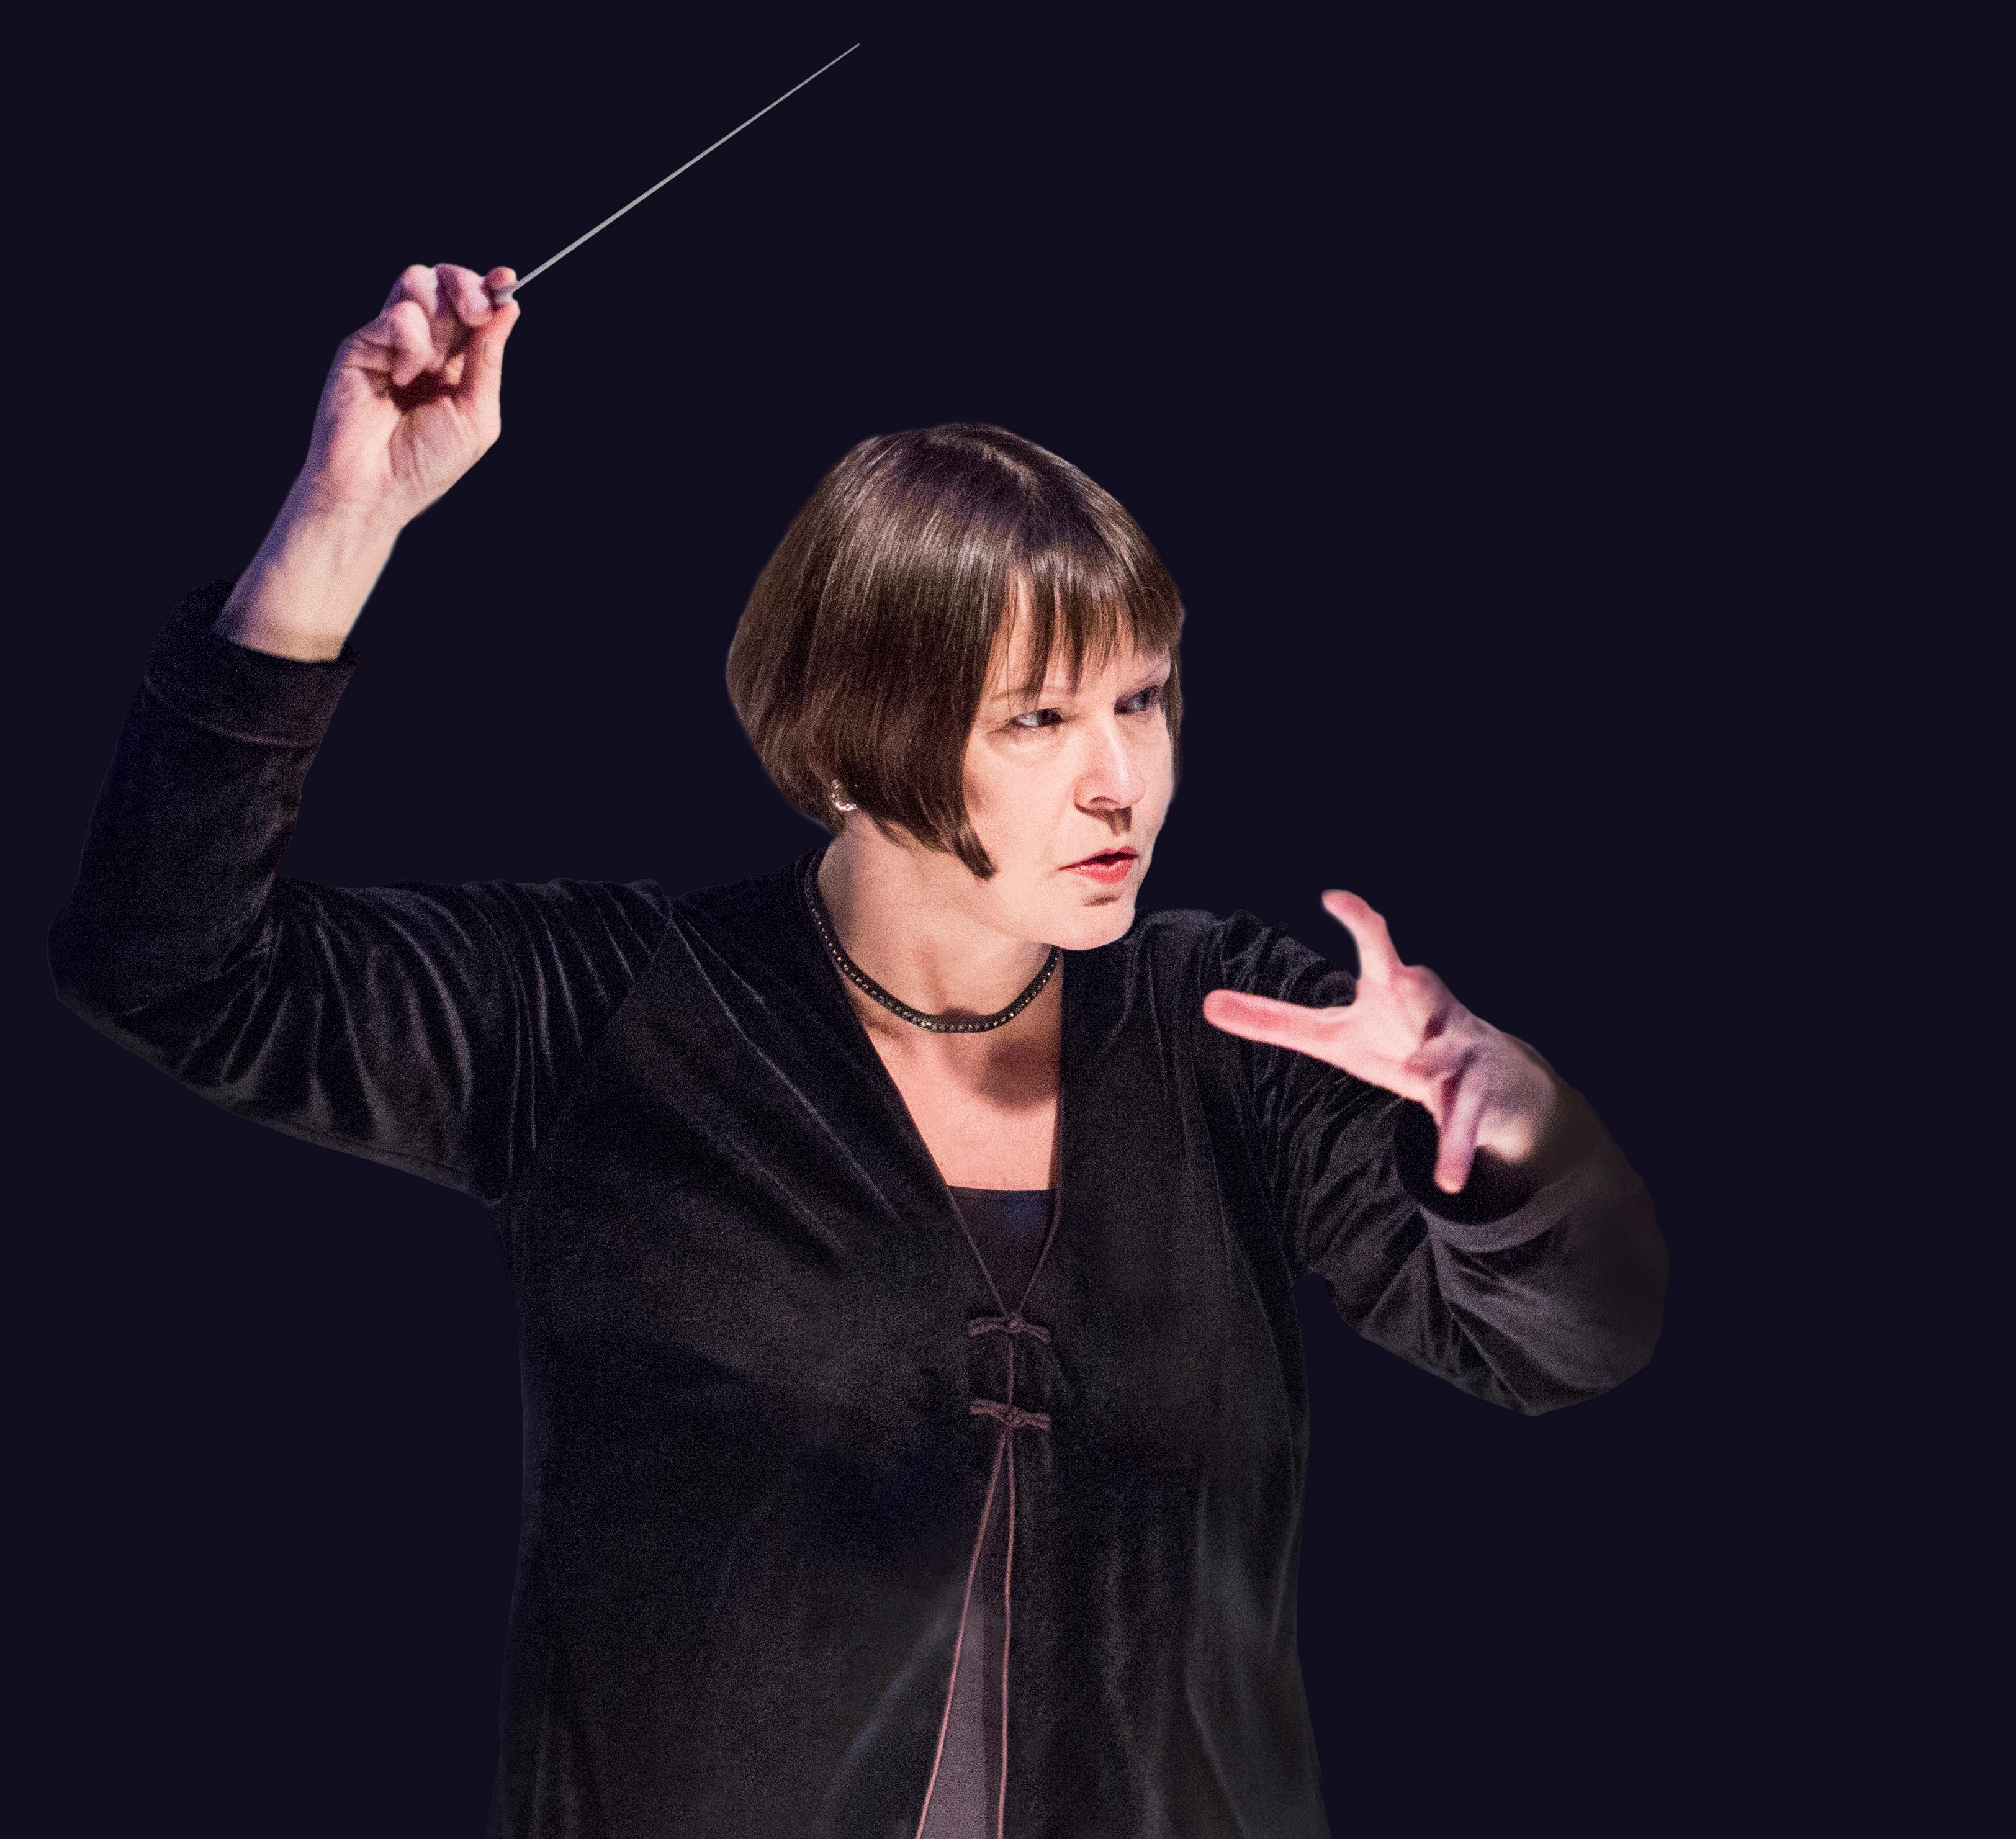 How I Made It: ‘I’m a leading female conductor in a male-dominated industry’